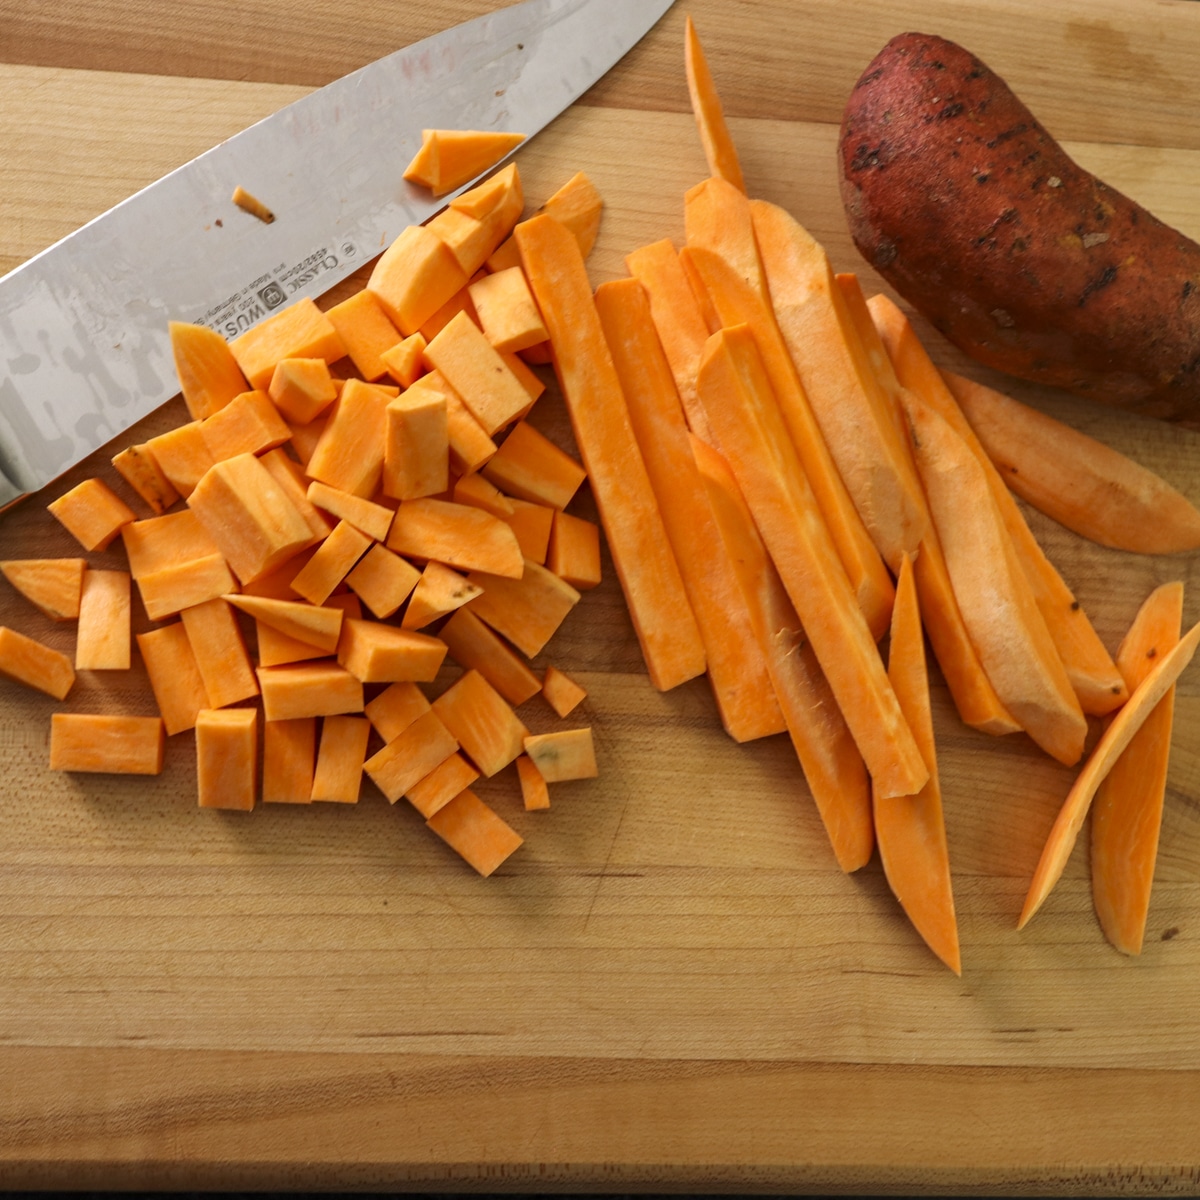 Sweet potatoes on a cutting board cut into cubes and fries.